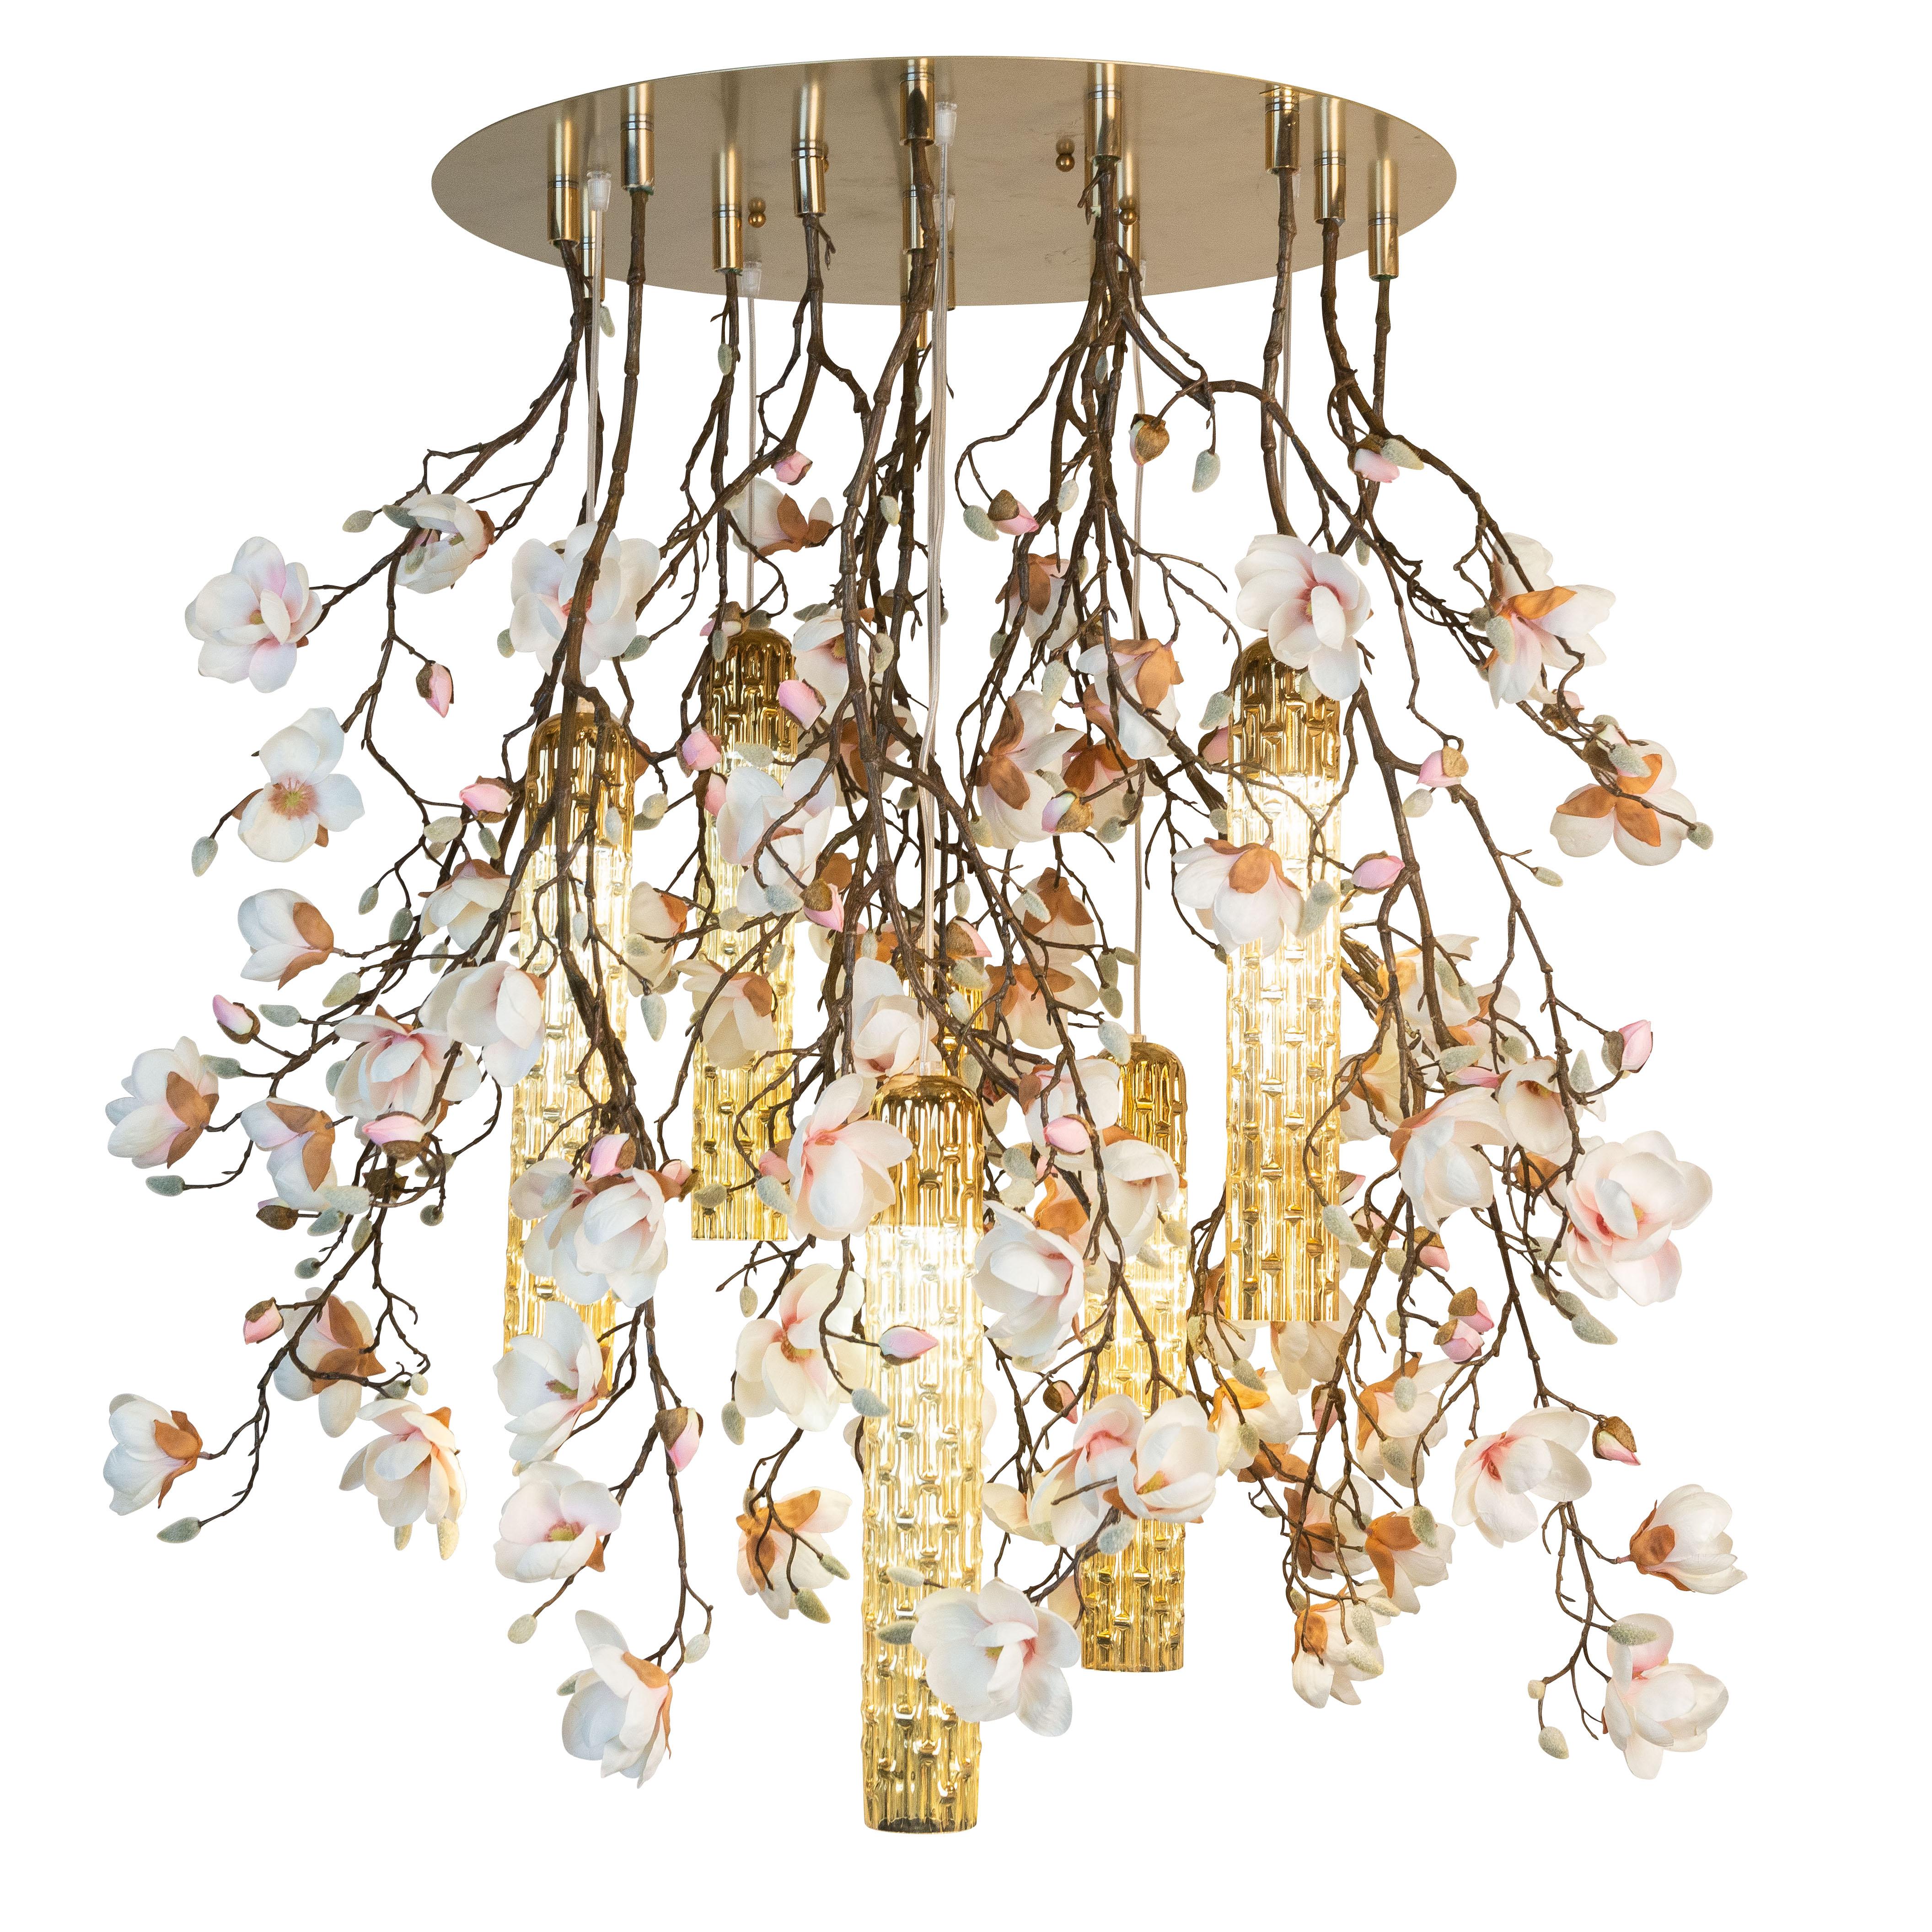 Flower Power Magnolia Pink-Cream & Gold Pipes Round Chandelier, Venice, Italy For Sale